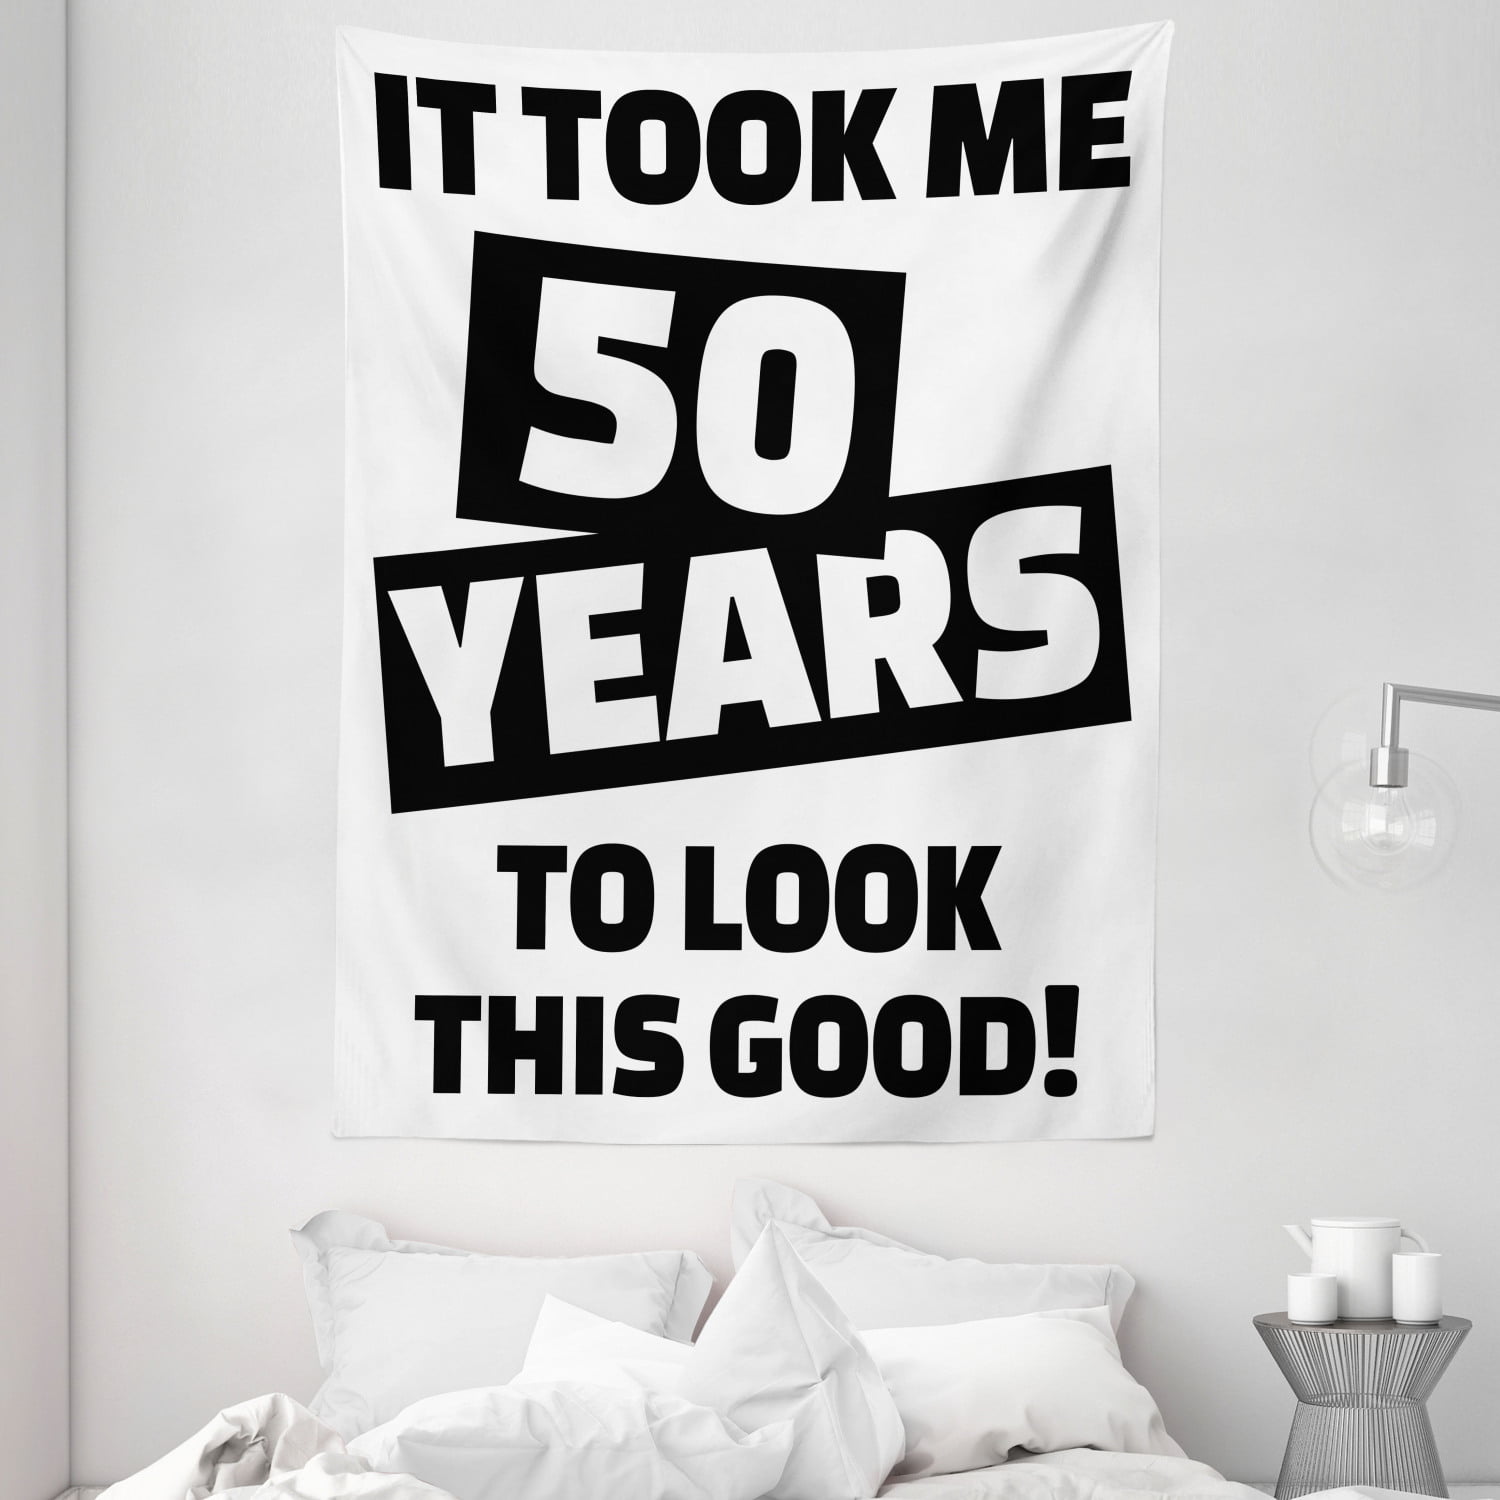 50th Birthday Decorations Tapestry, Funny Happy Expression Self Confidence  Themed Pictogram Style, Wall Hanging for Bedroom Living Room Dorm Decor,  60W X 80L Inches, Black White, by Ambesonne 